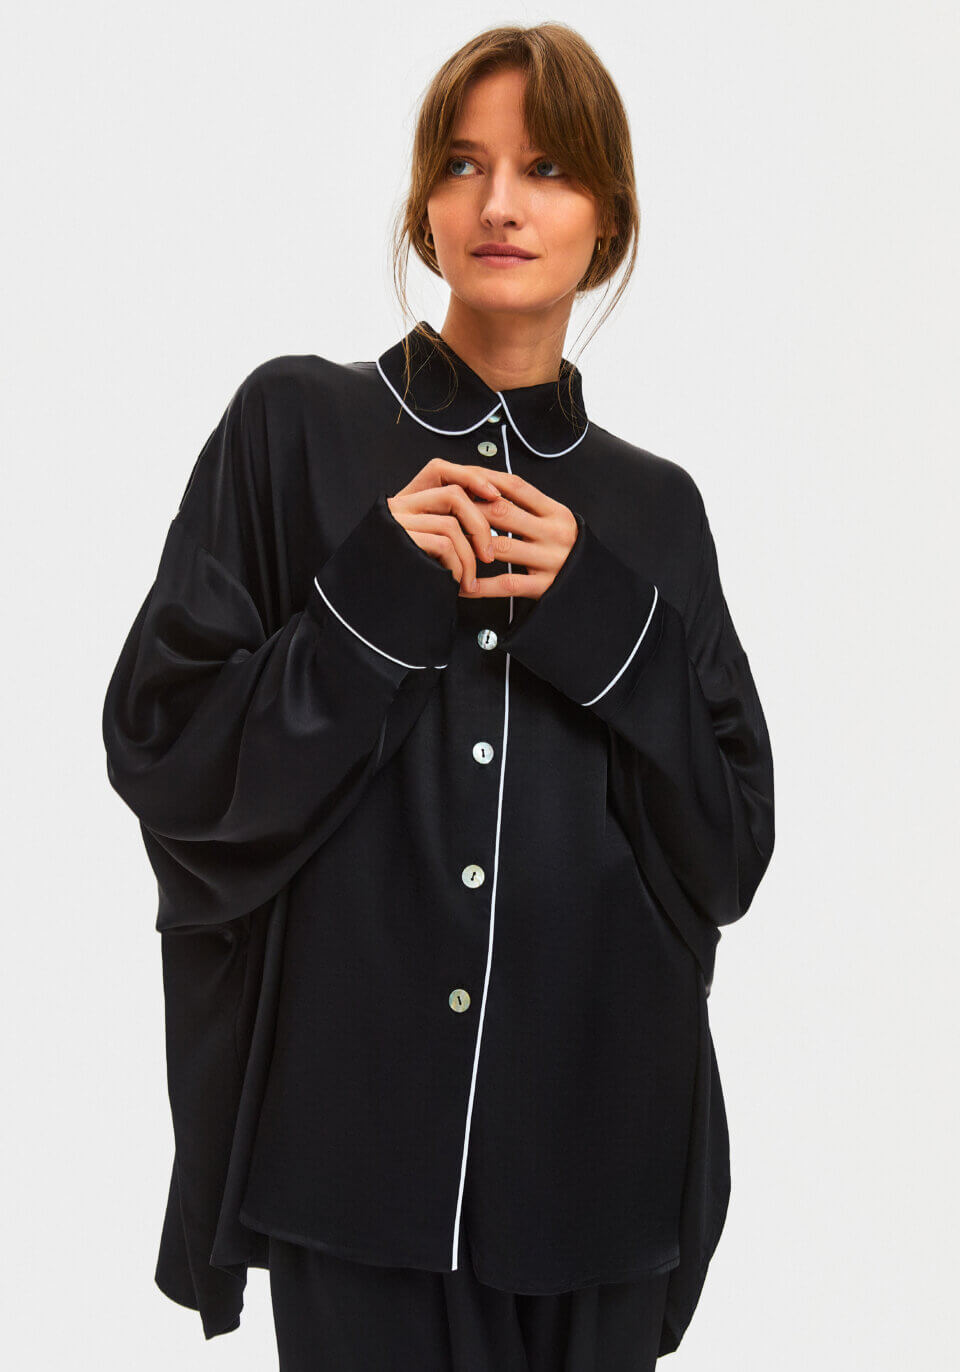 Sleeper for women | Cult pajamas and clothing on sale